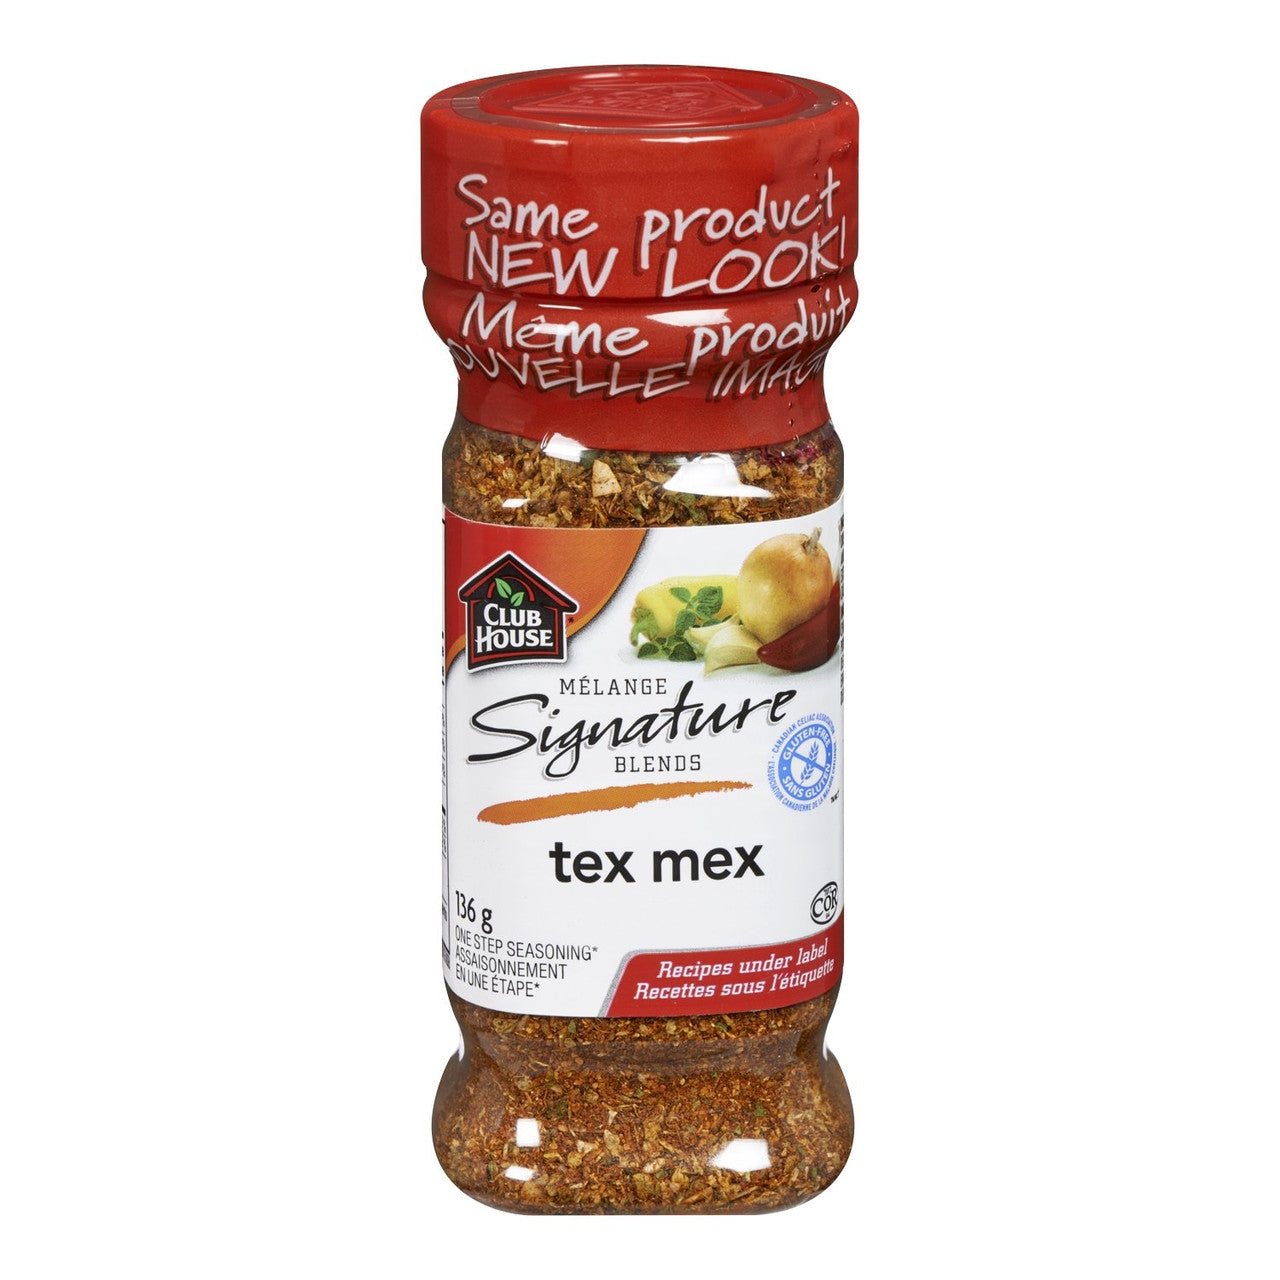 Club House Signature Blends Tex Mex One Step Seasoning, 136g/4.8oz, (Imported from Canada)